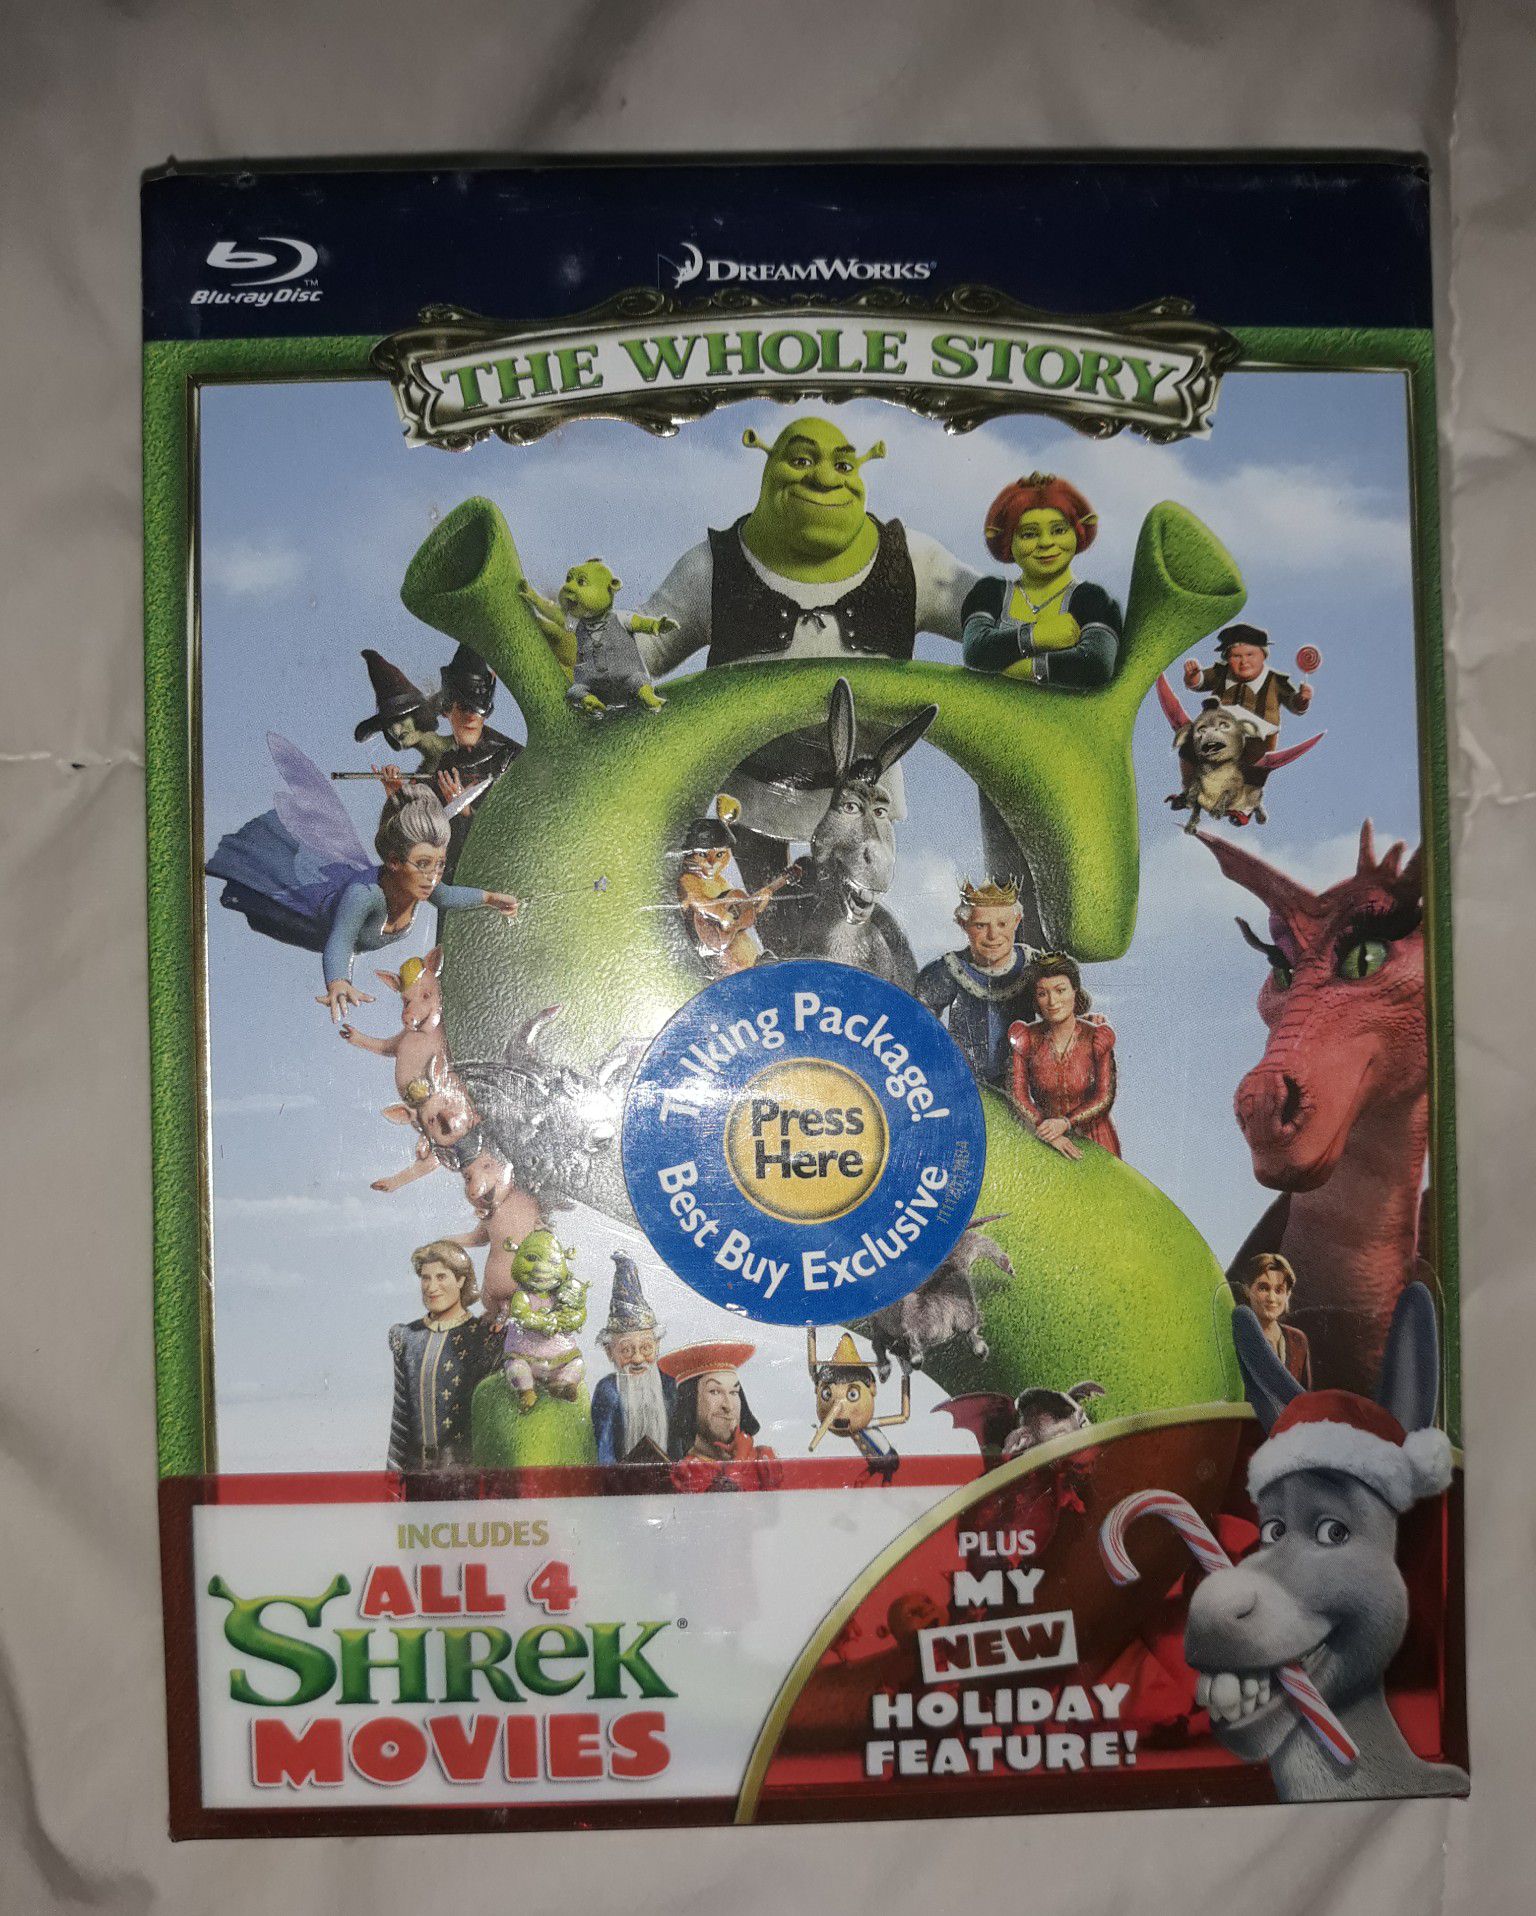 Brand new sealed SHREK BOX SET Christmas feature included for holidays. Great for whole family for Christmas cheer!